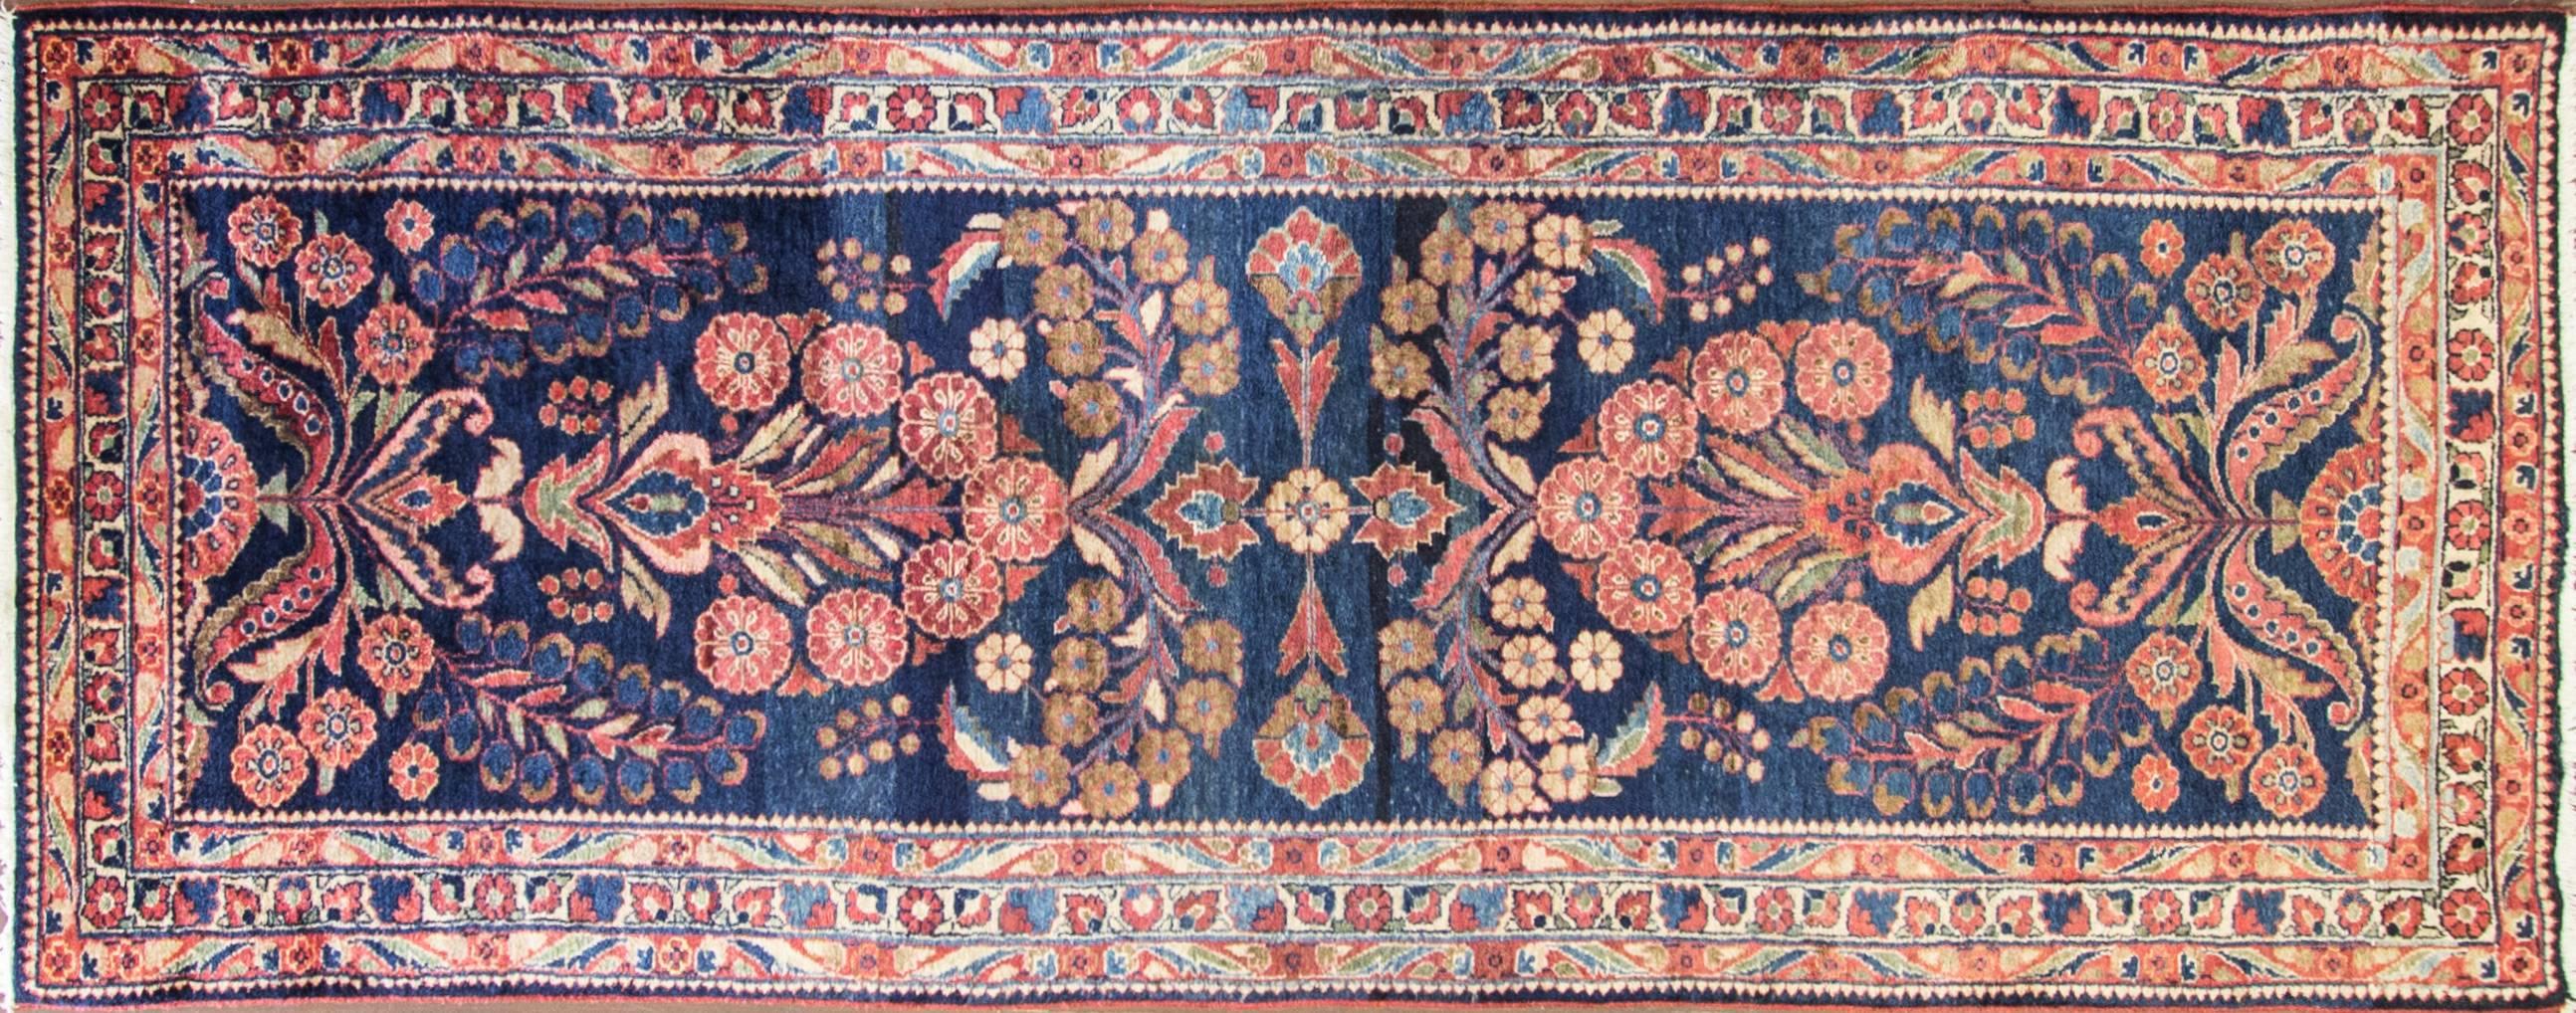 Amazing Sarouk runner, measures 4'2" x 11'.
This Persian Sarouk runner has unusual size and amazing design.
Sarouks also called Sarouks are double-wefted, heavier carpets with a higher knot count than rug from the village of Sultanabad.